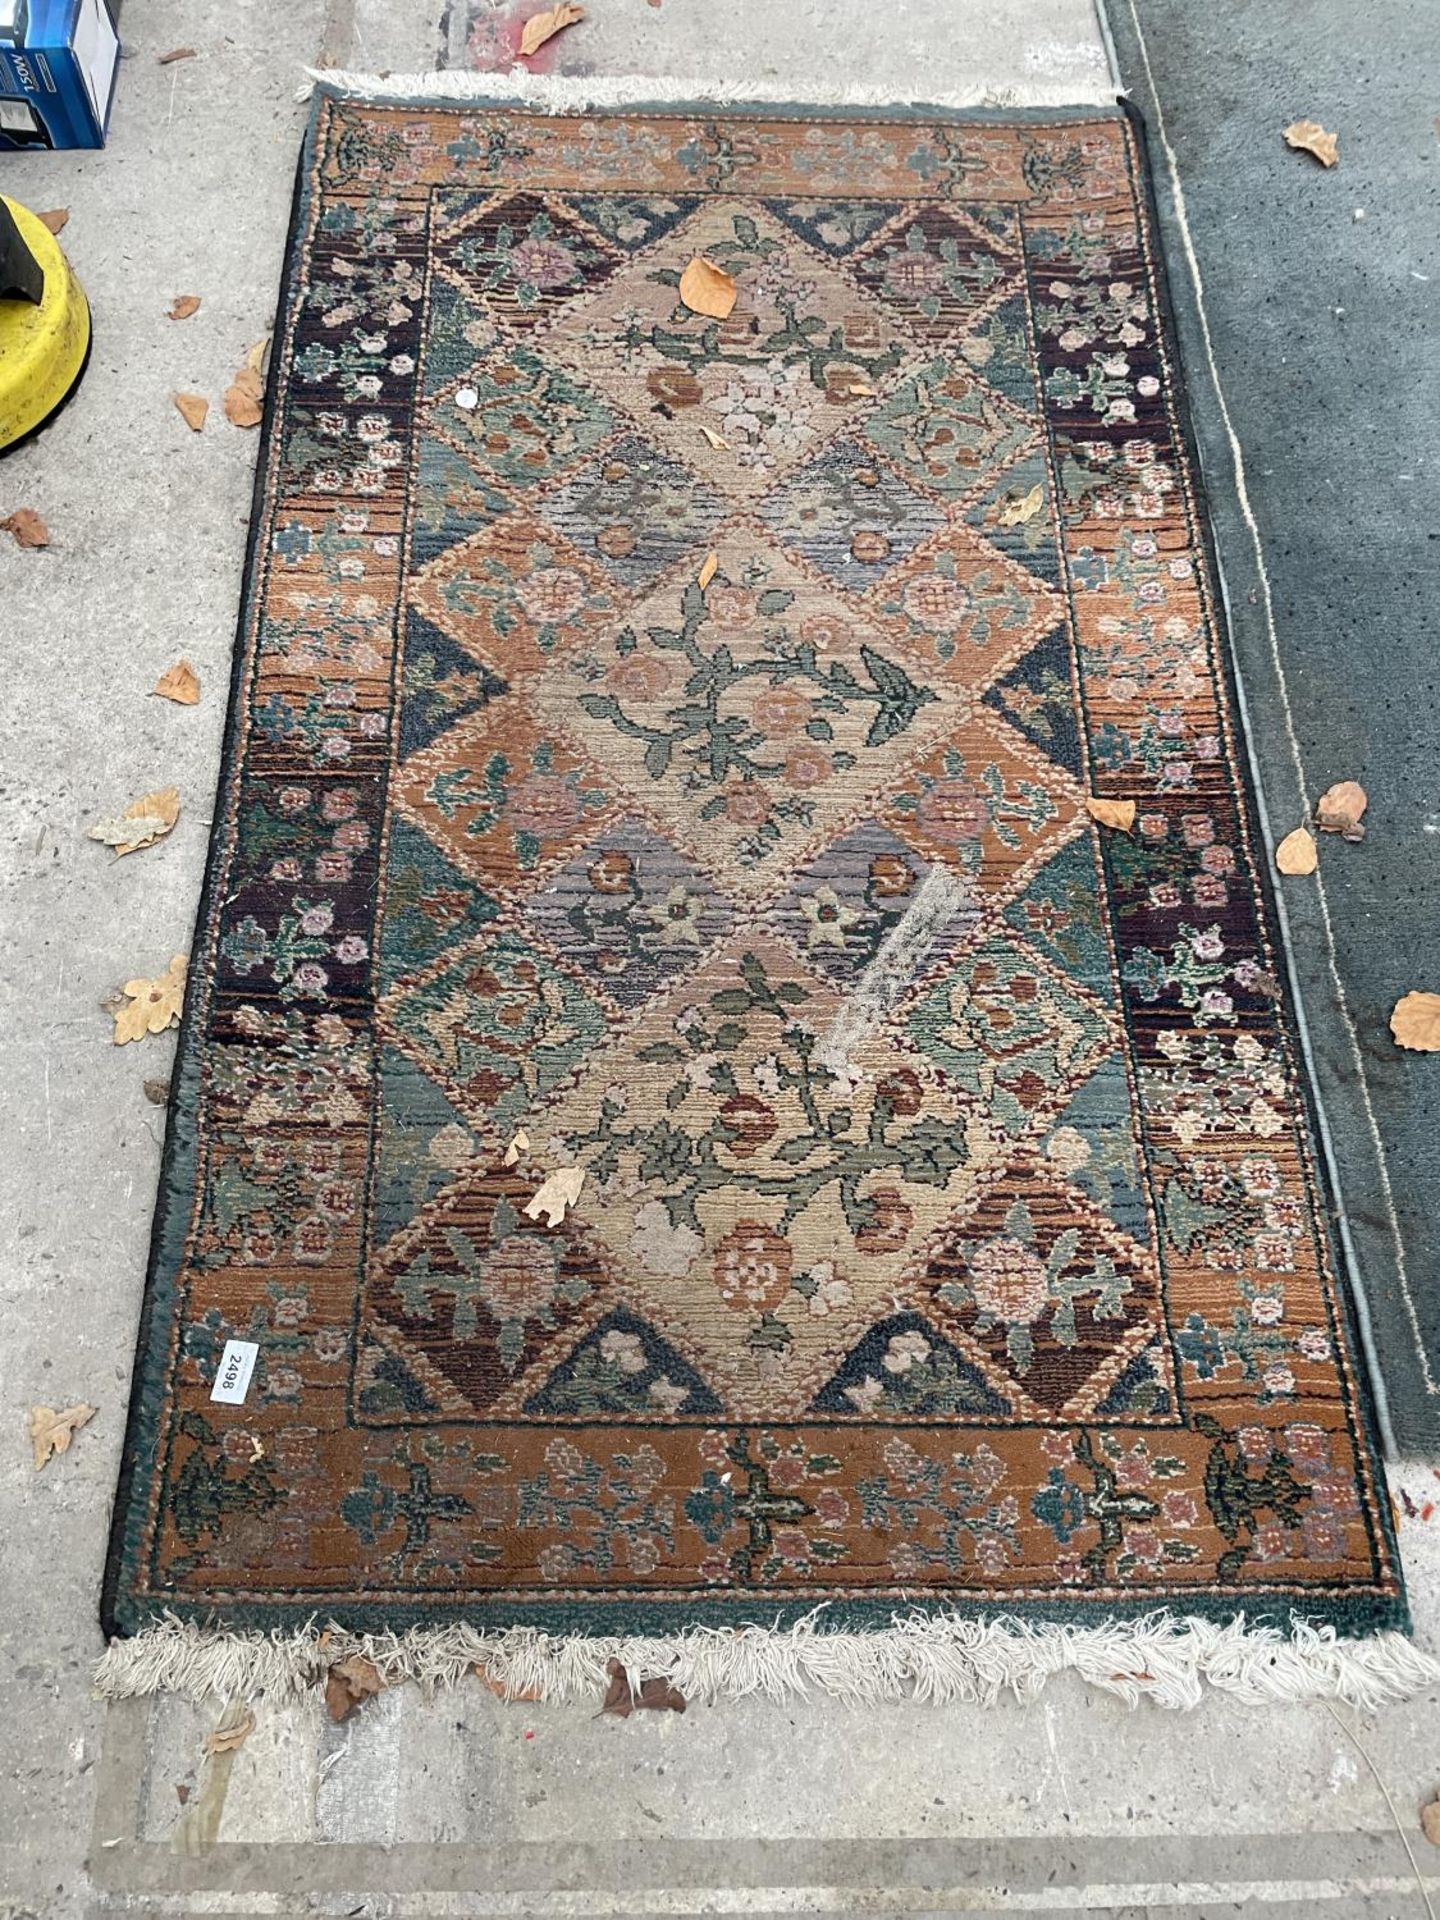 A SMALL PATTERNED FRINGE RUG